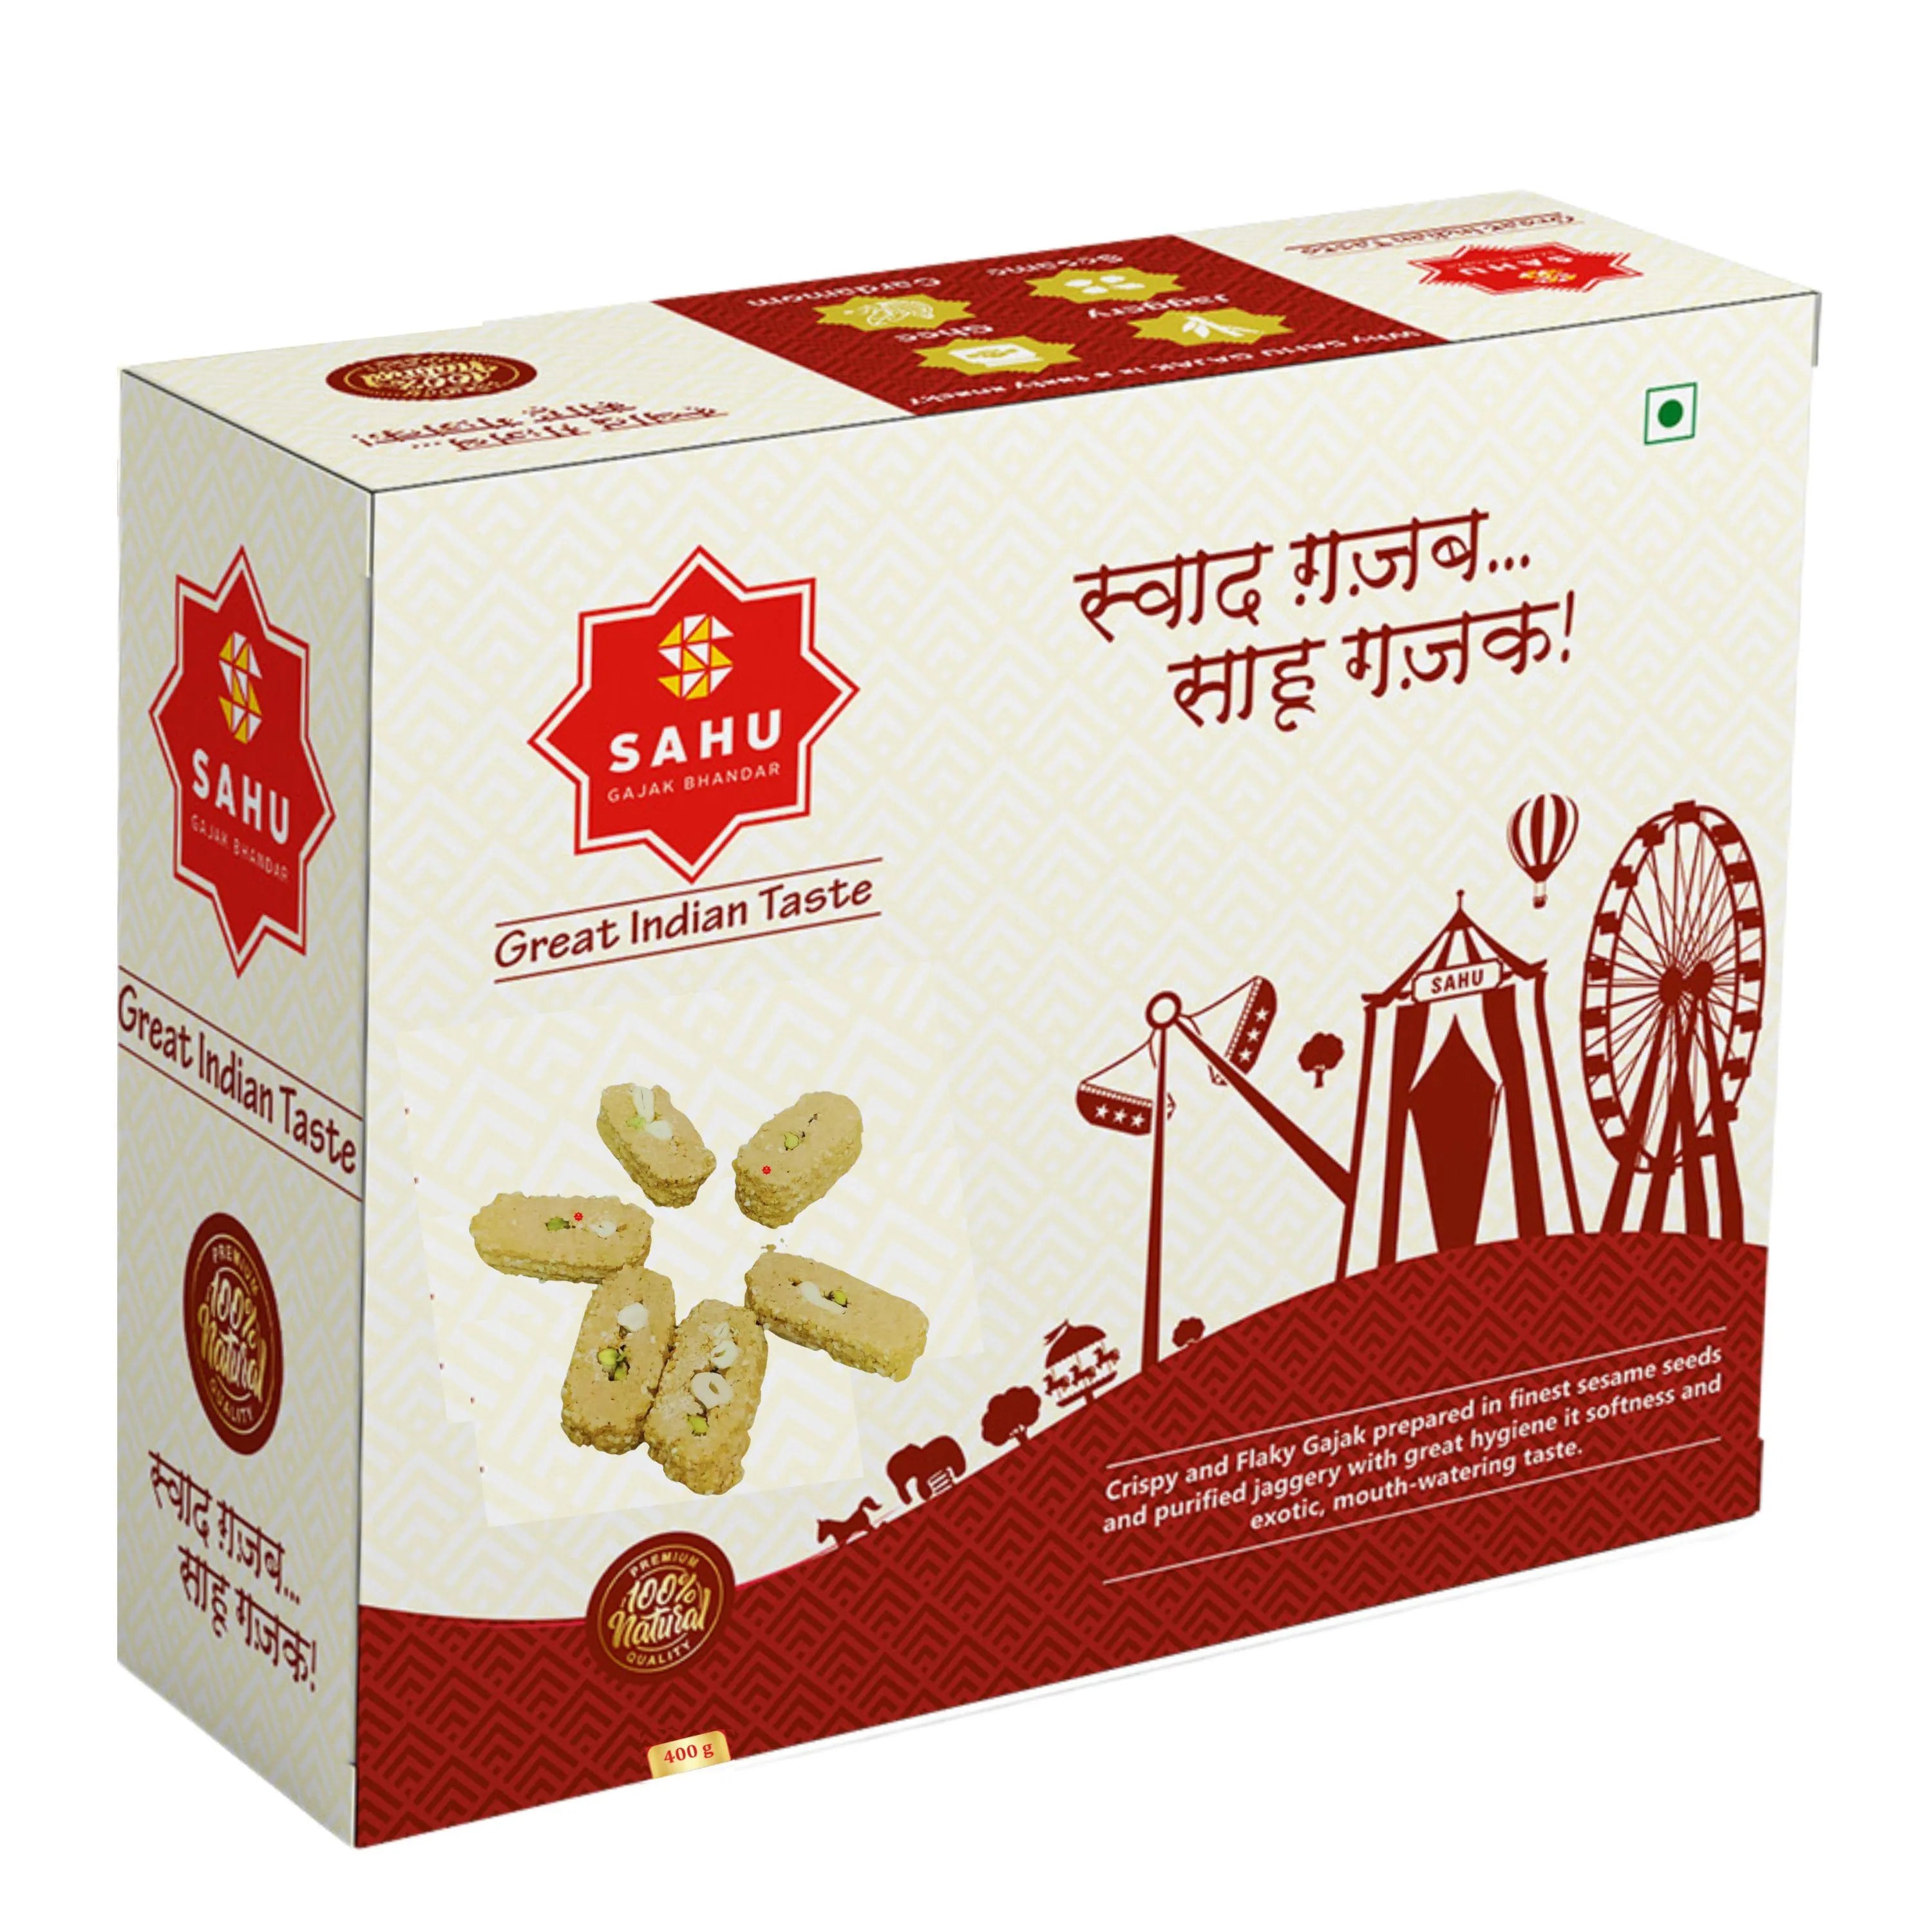 400-gram pack of Sugar Dry Fruit Agra Gajjak, featuring a delicious mix of crushed dry fruits embedded in a glossy, golden jaggery base, traditionally prepared and packed for freshness